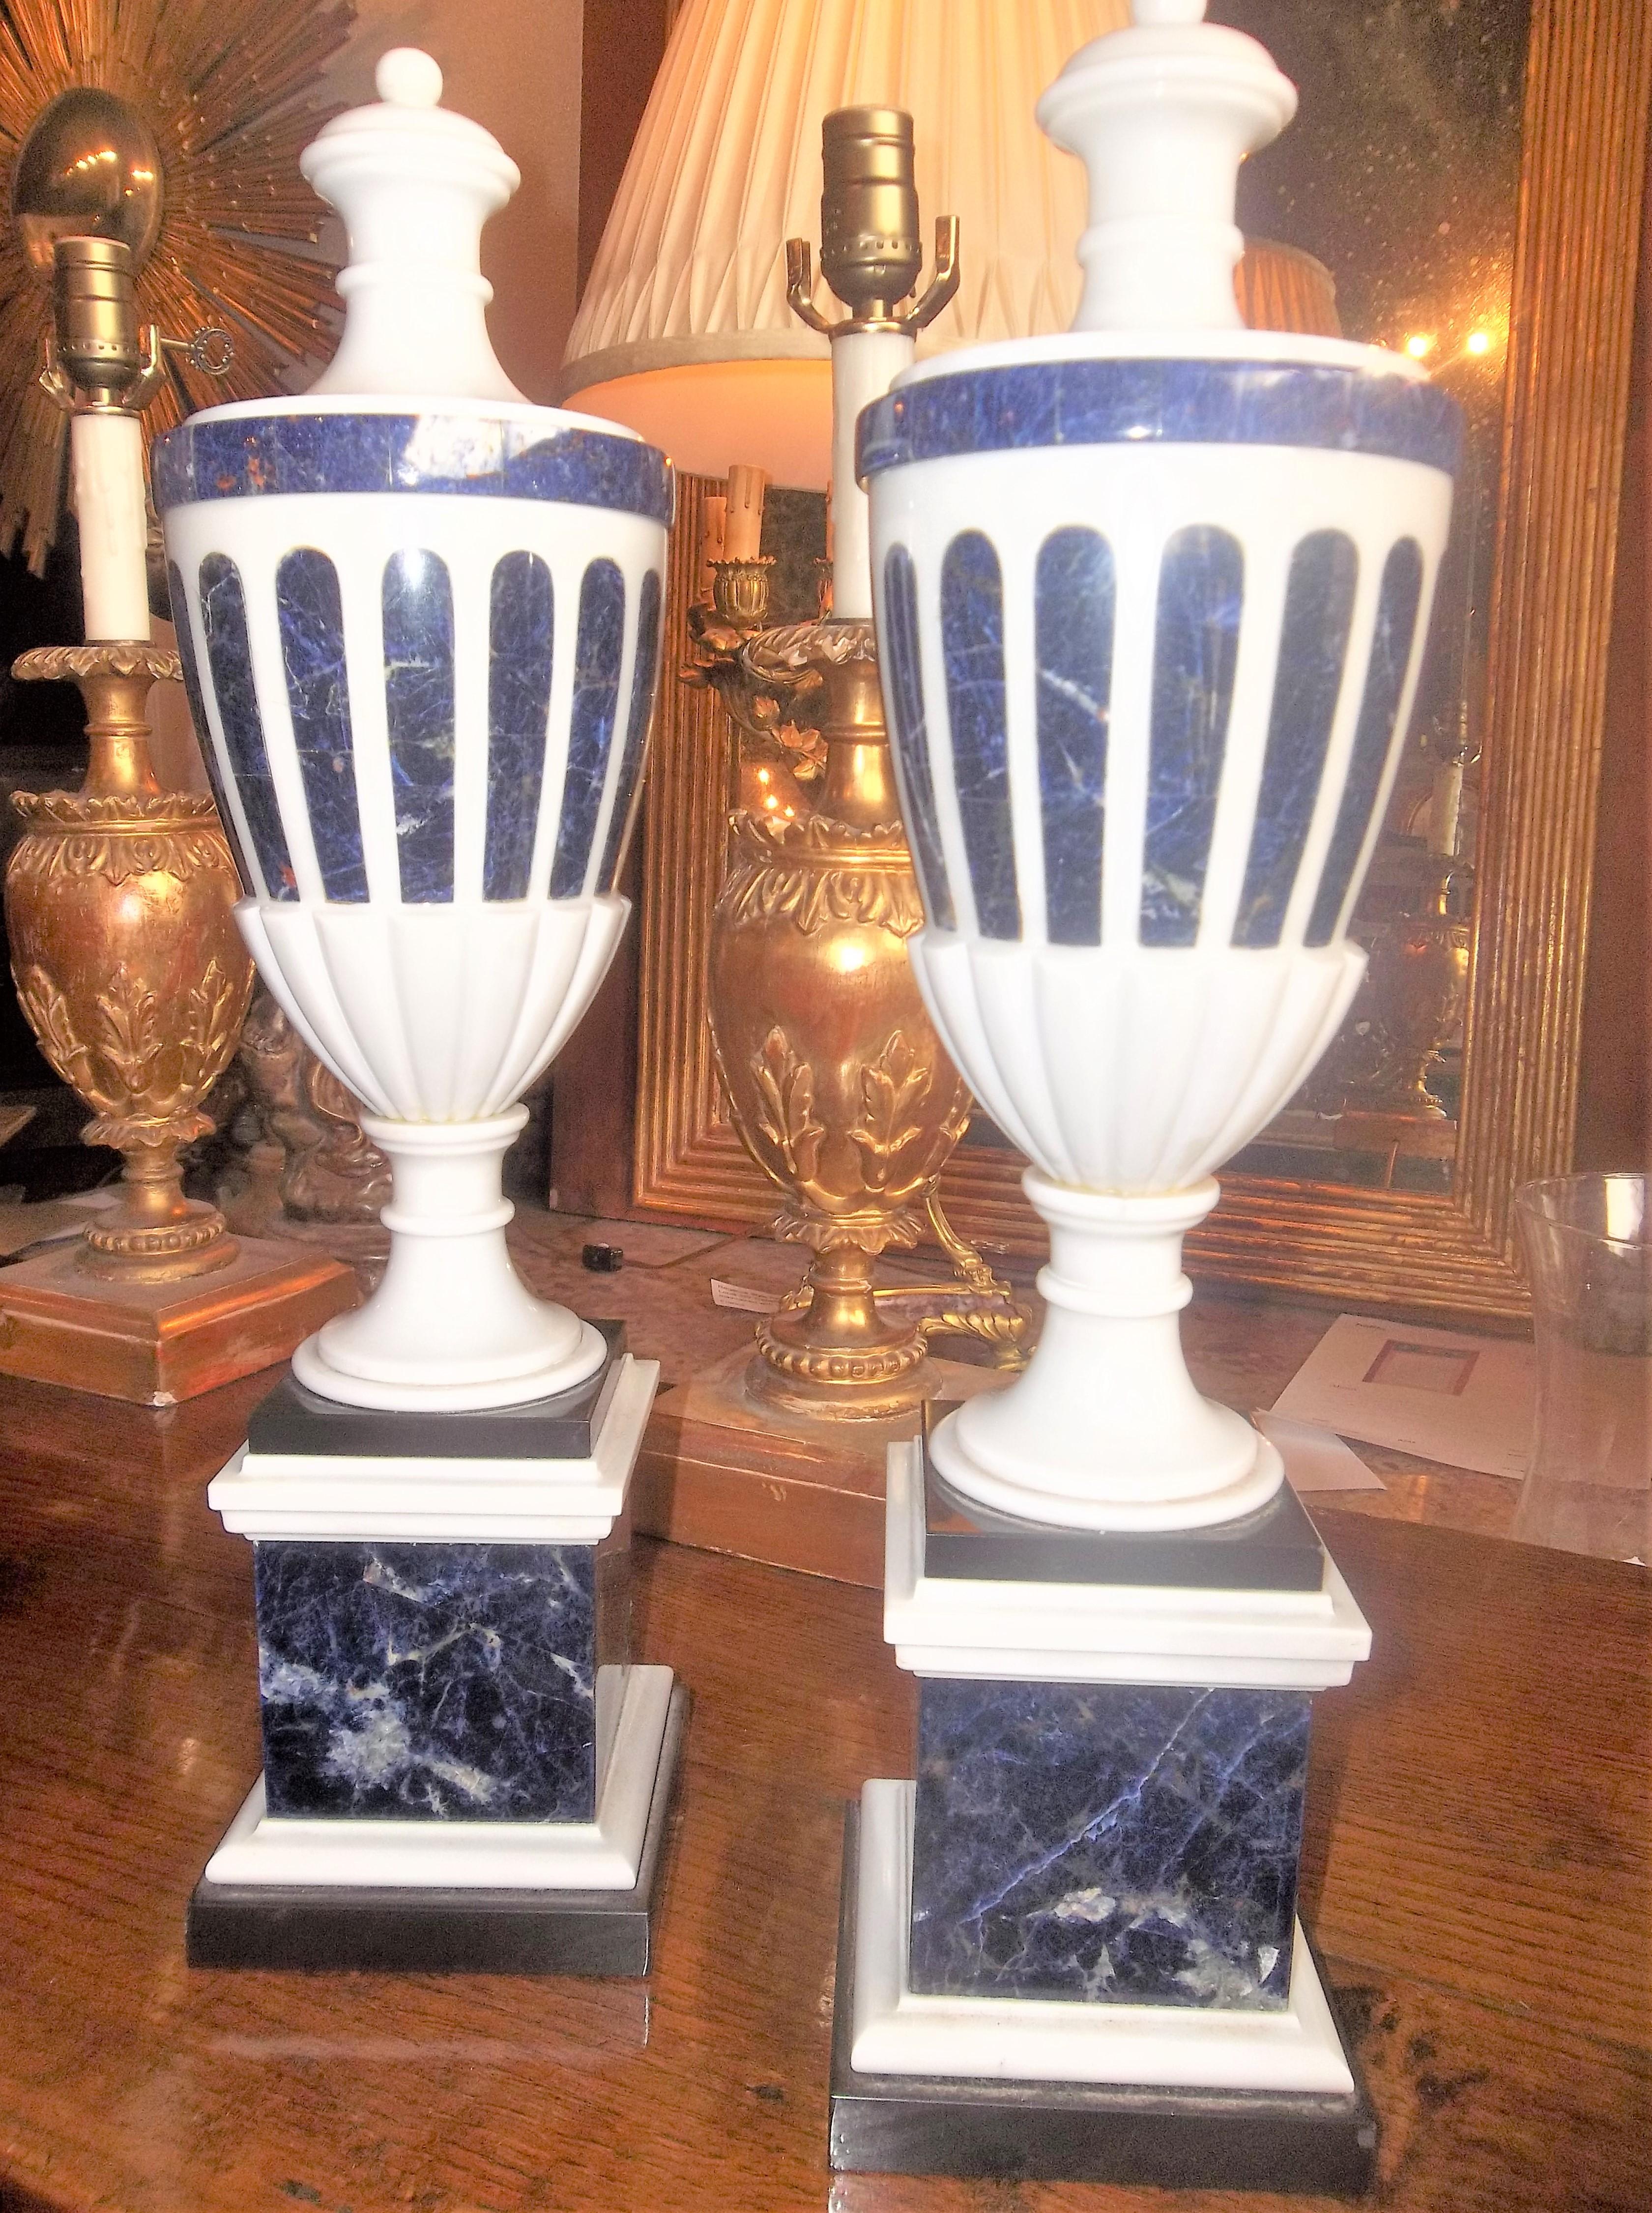 A  tall pair of cassolette garnitures or reversible into candlesticks on raised pedestals . Lapis inlaid into polished white marble or alabaster .The lapis with gold pyrite and white calcite veining.

Unmarked but best guess is France or Italy 

In